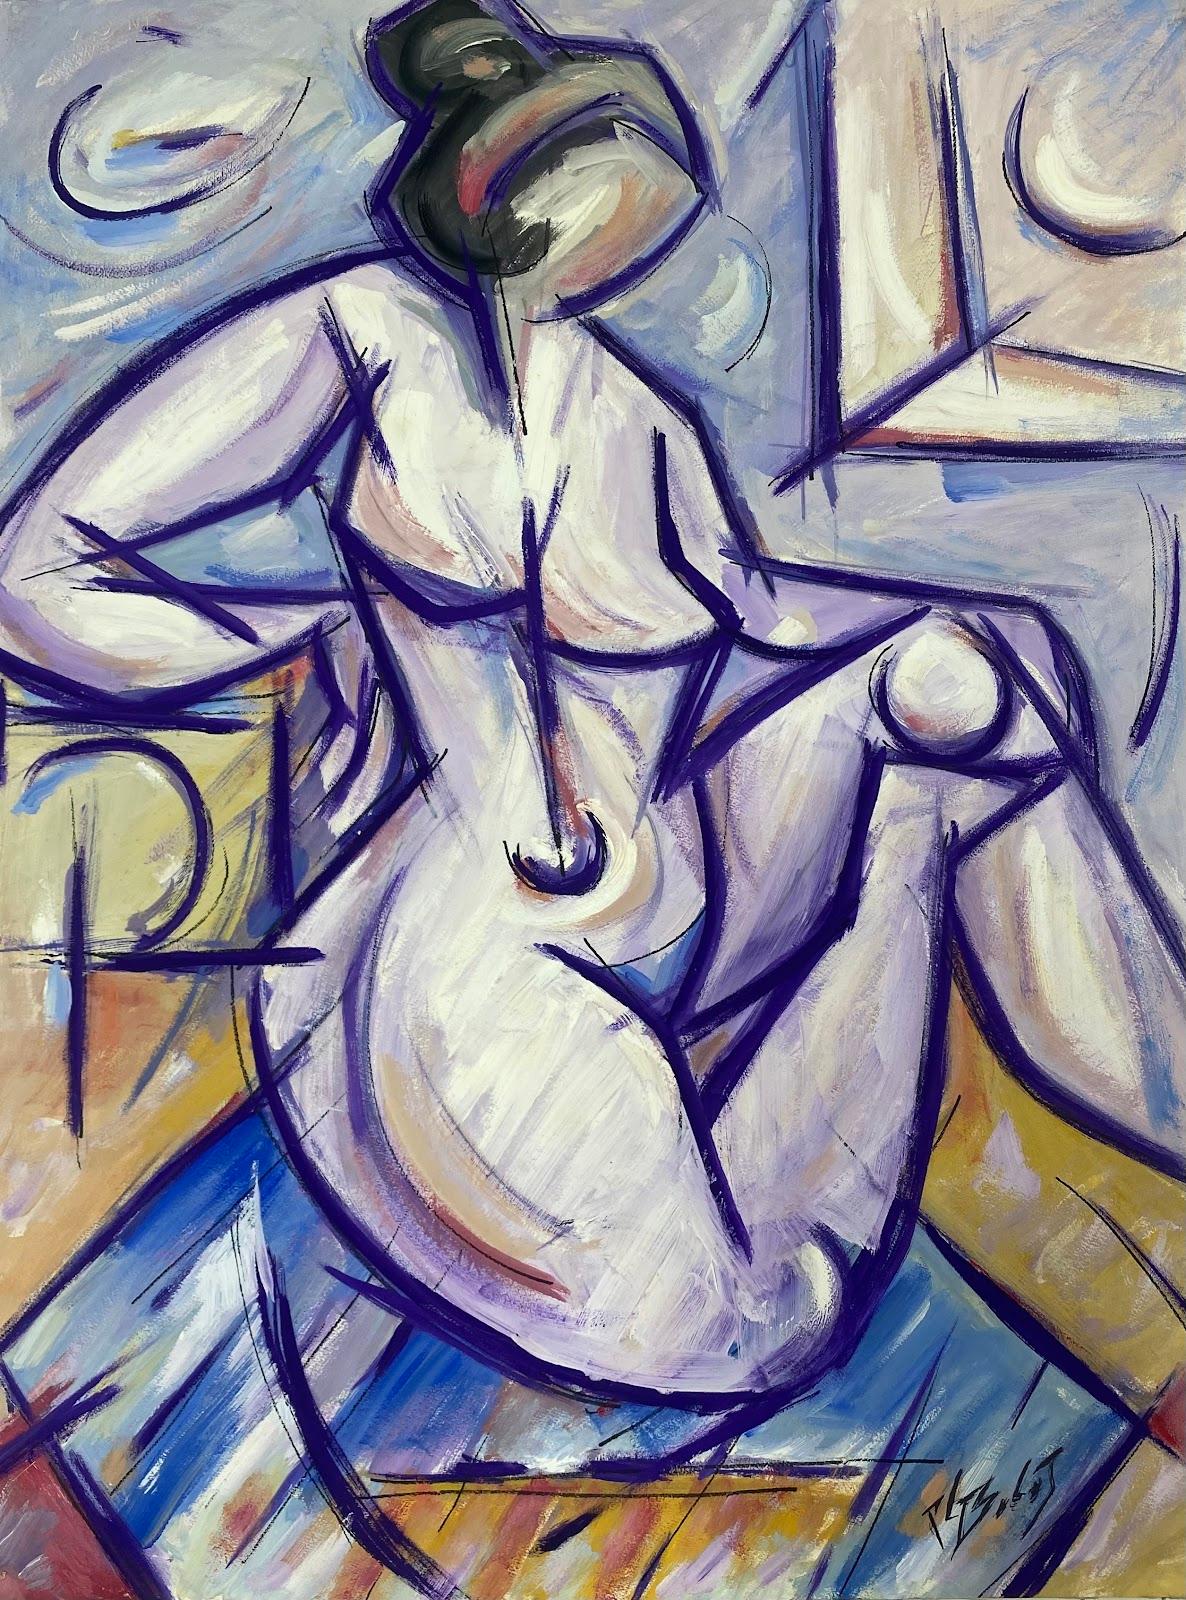 Figurative Painting Paul-Louis Bolot (French 1918-2003) - 1970's French Modernist Cubist Painting Seated Nude Woman Purple Abstract